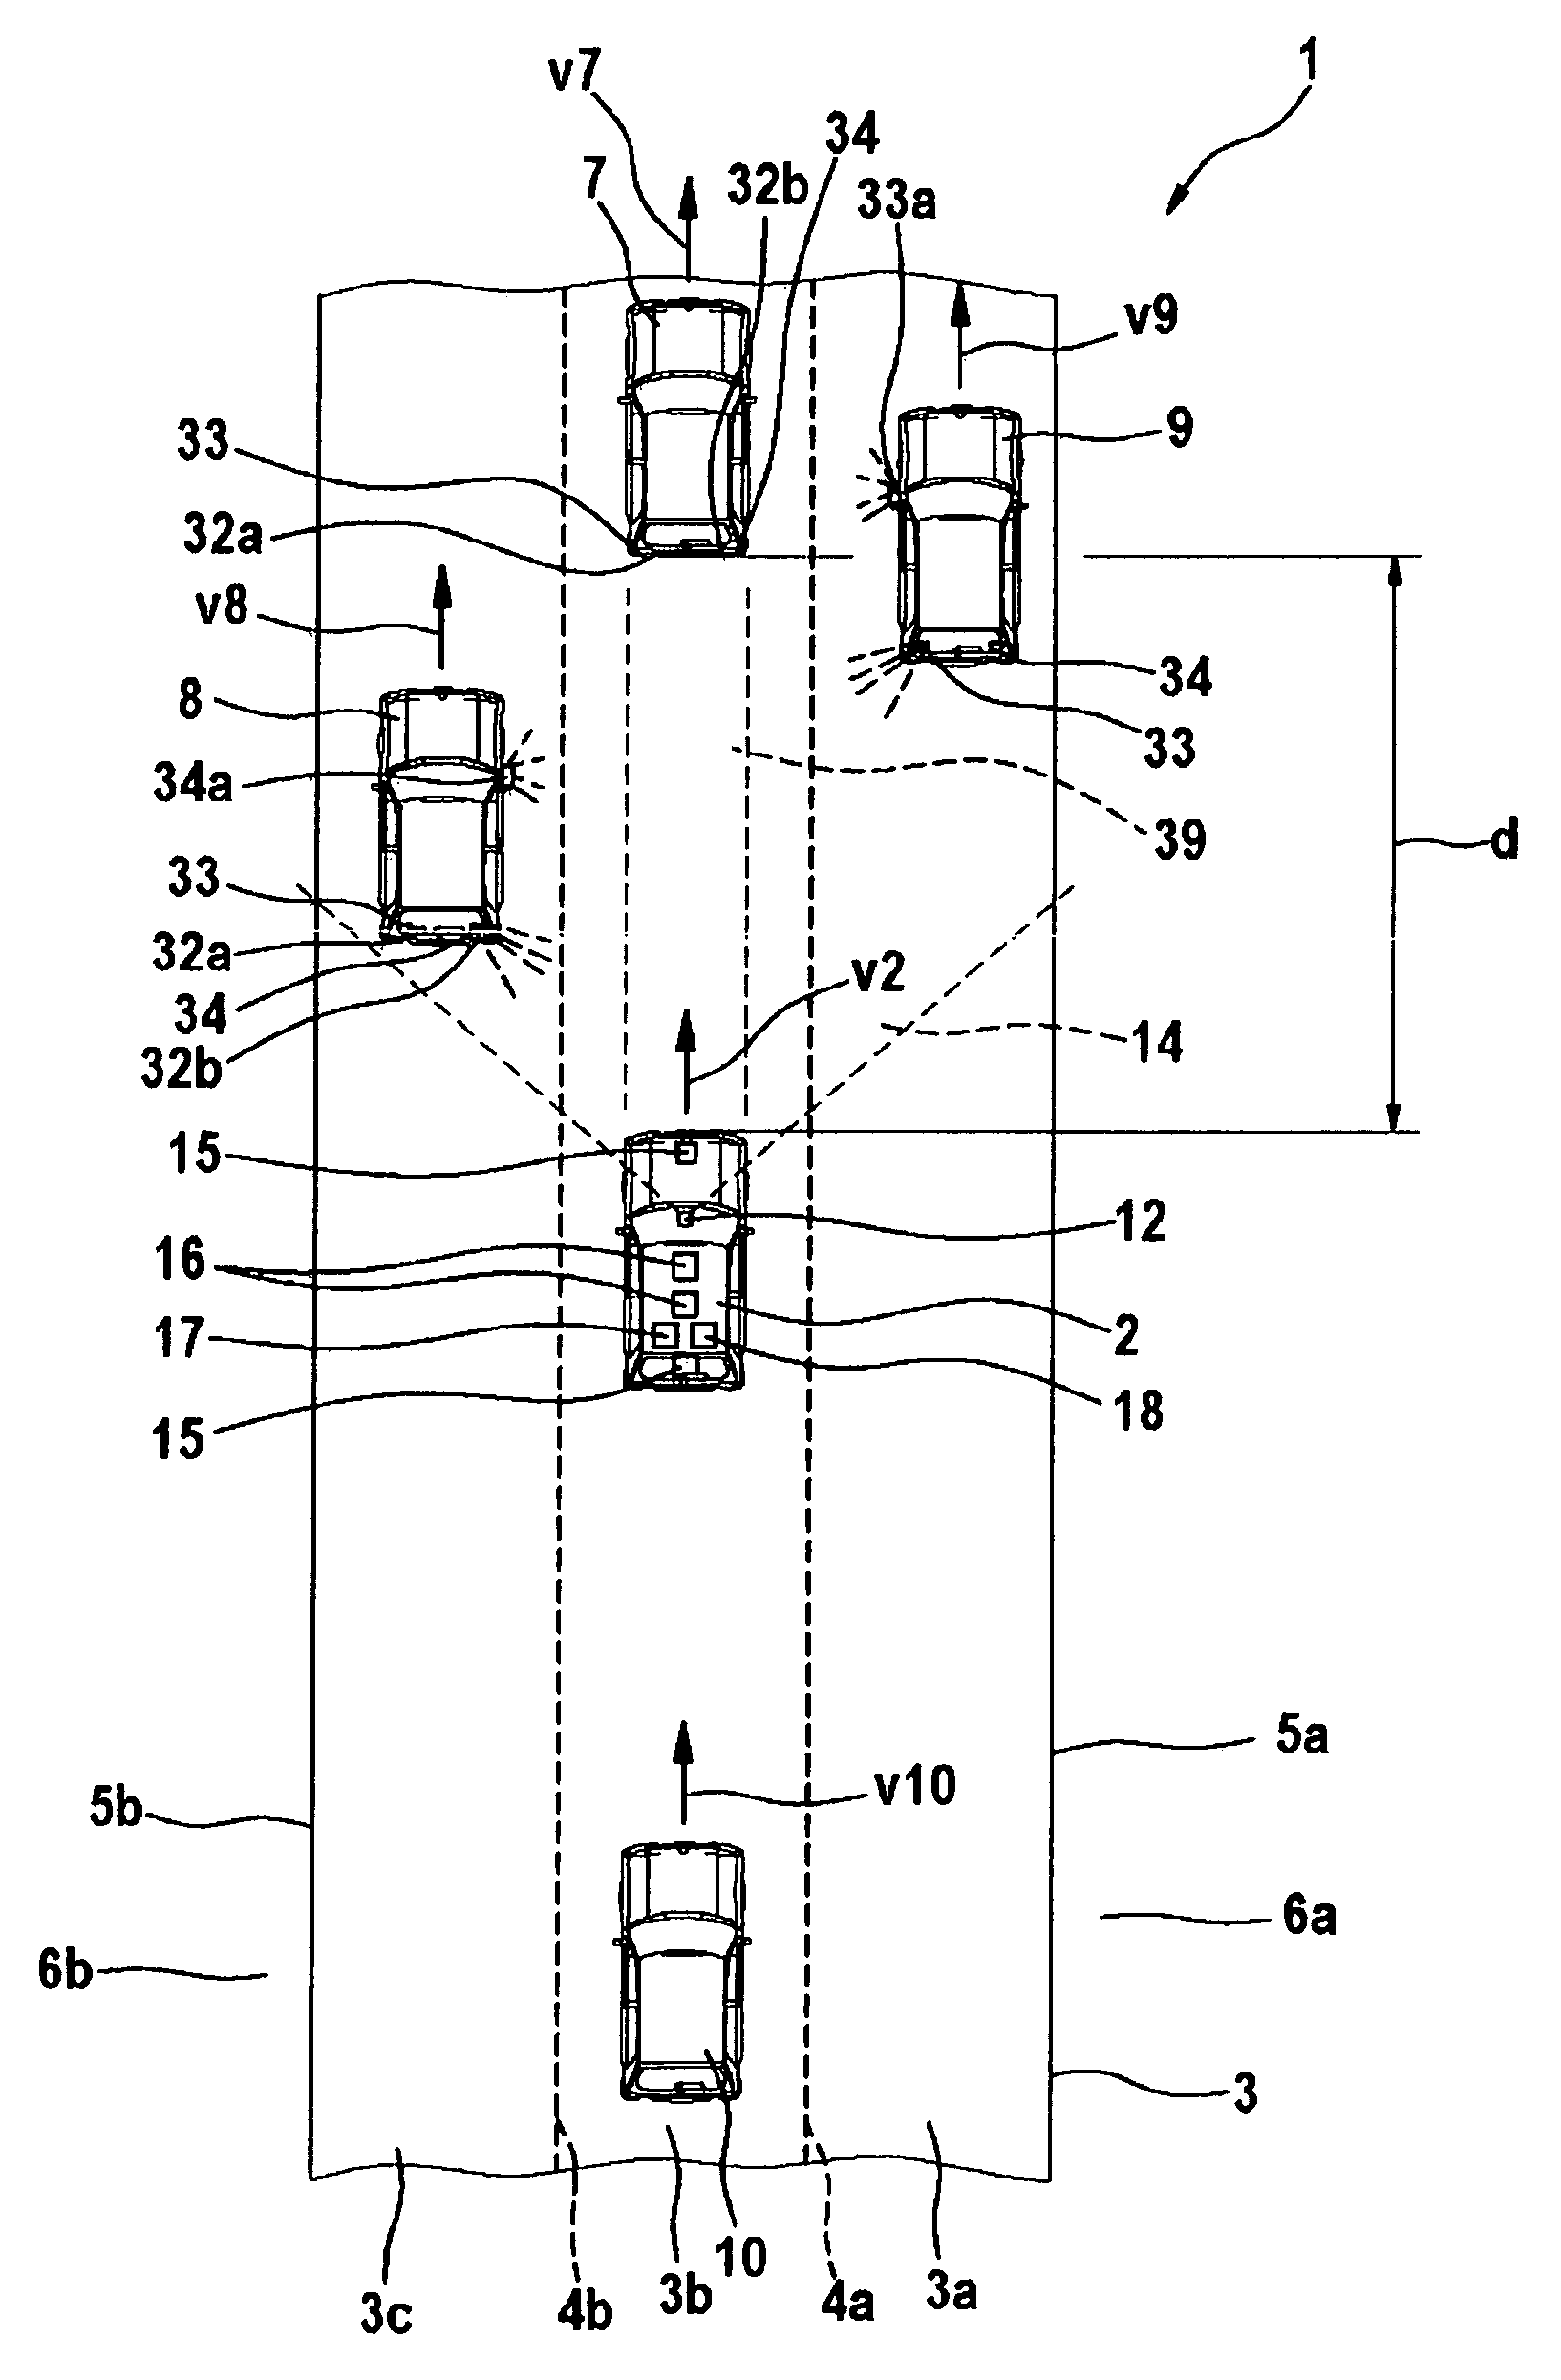 Method for assisting a user of a vehicle, control device for a driver-assistance system of a vehicle and vehicle having such a control device